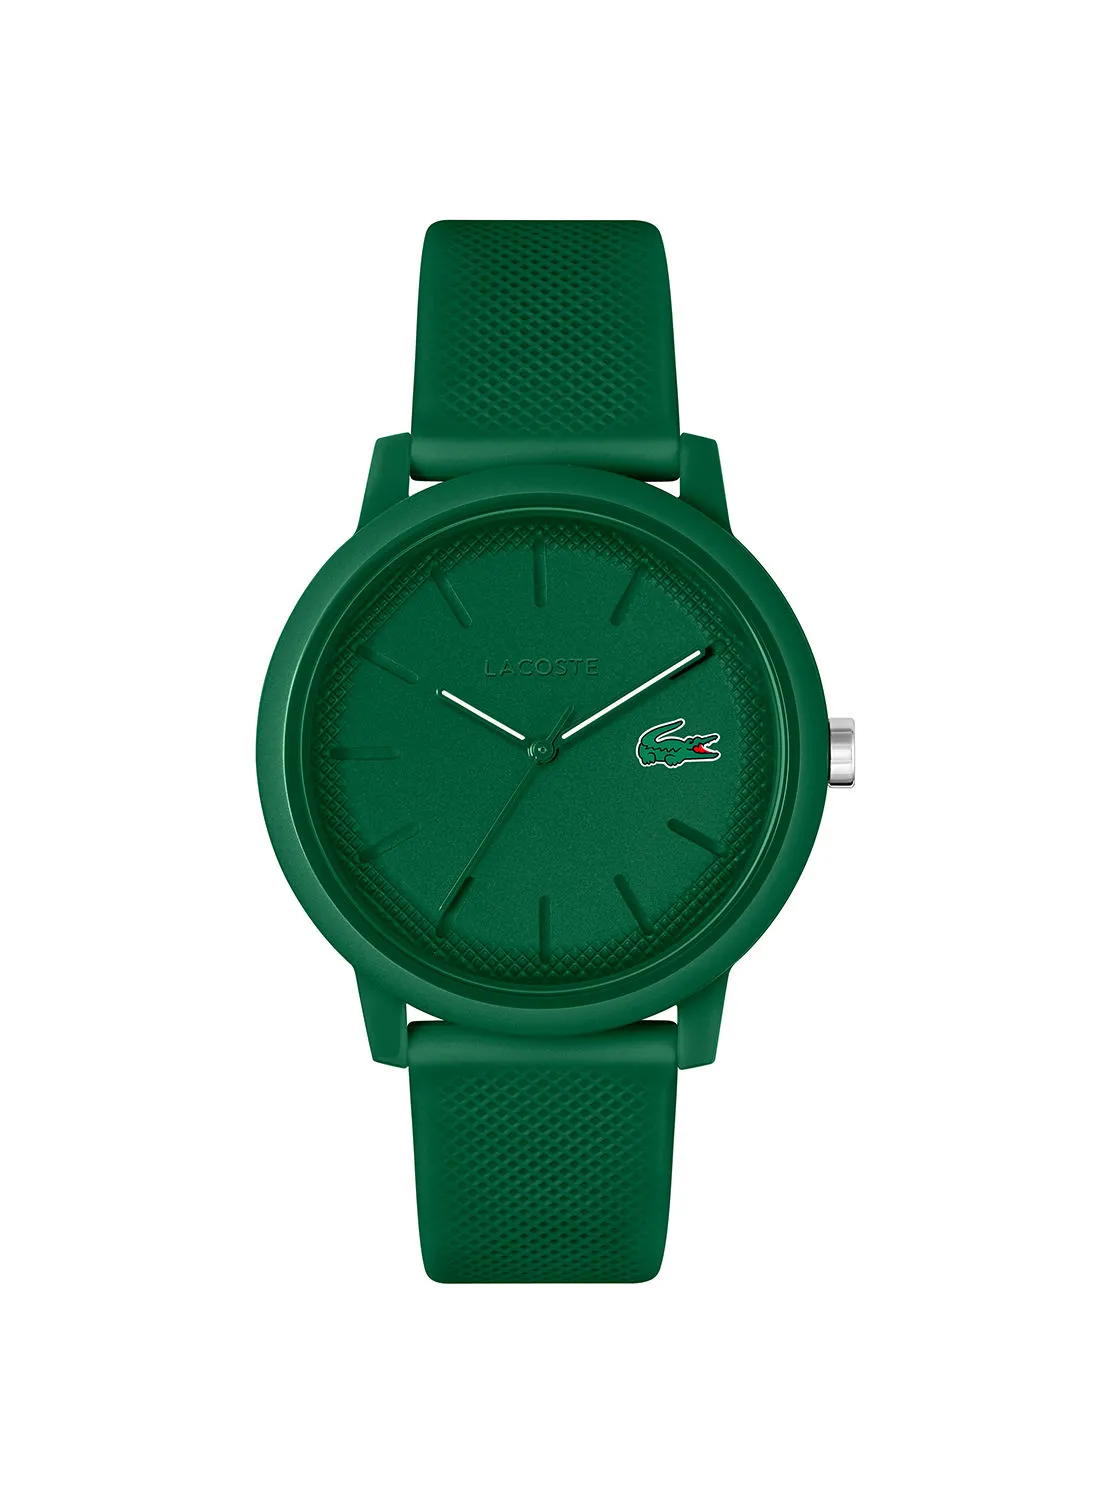 LACOSTE Silicone Analog Wrist Watch 2011170